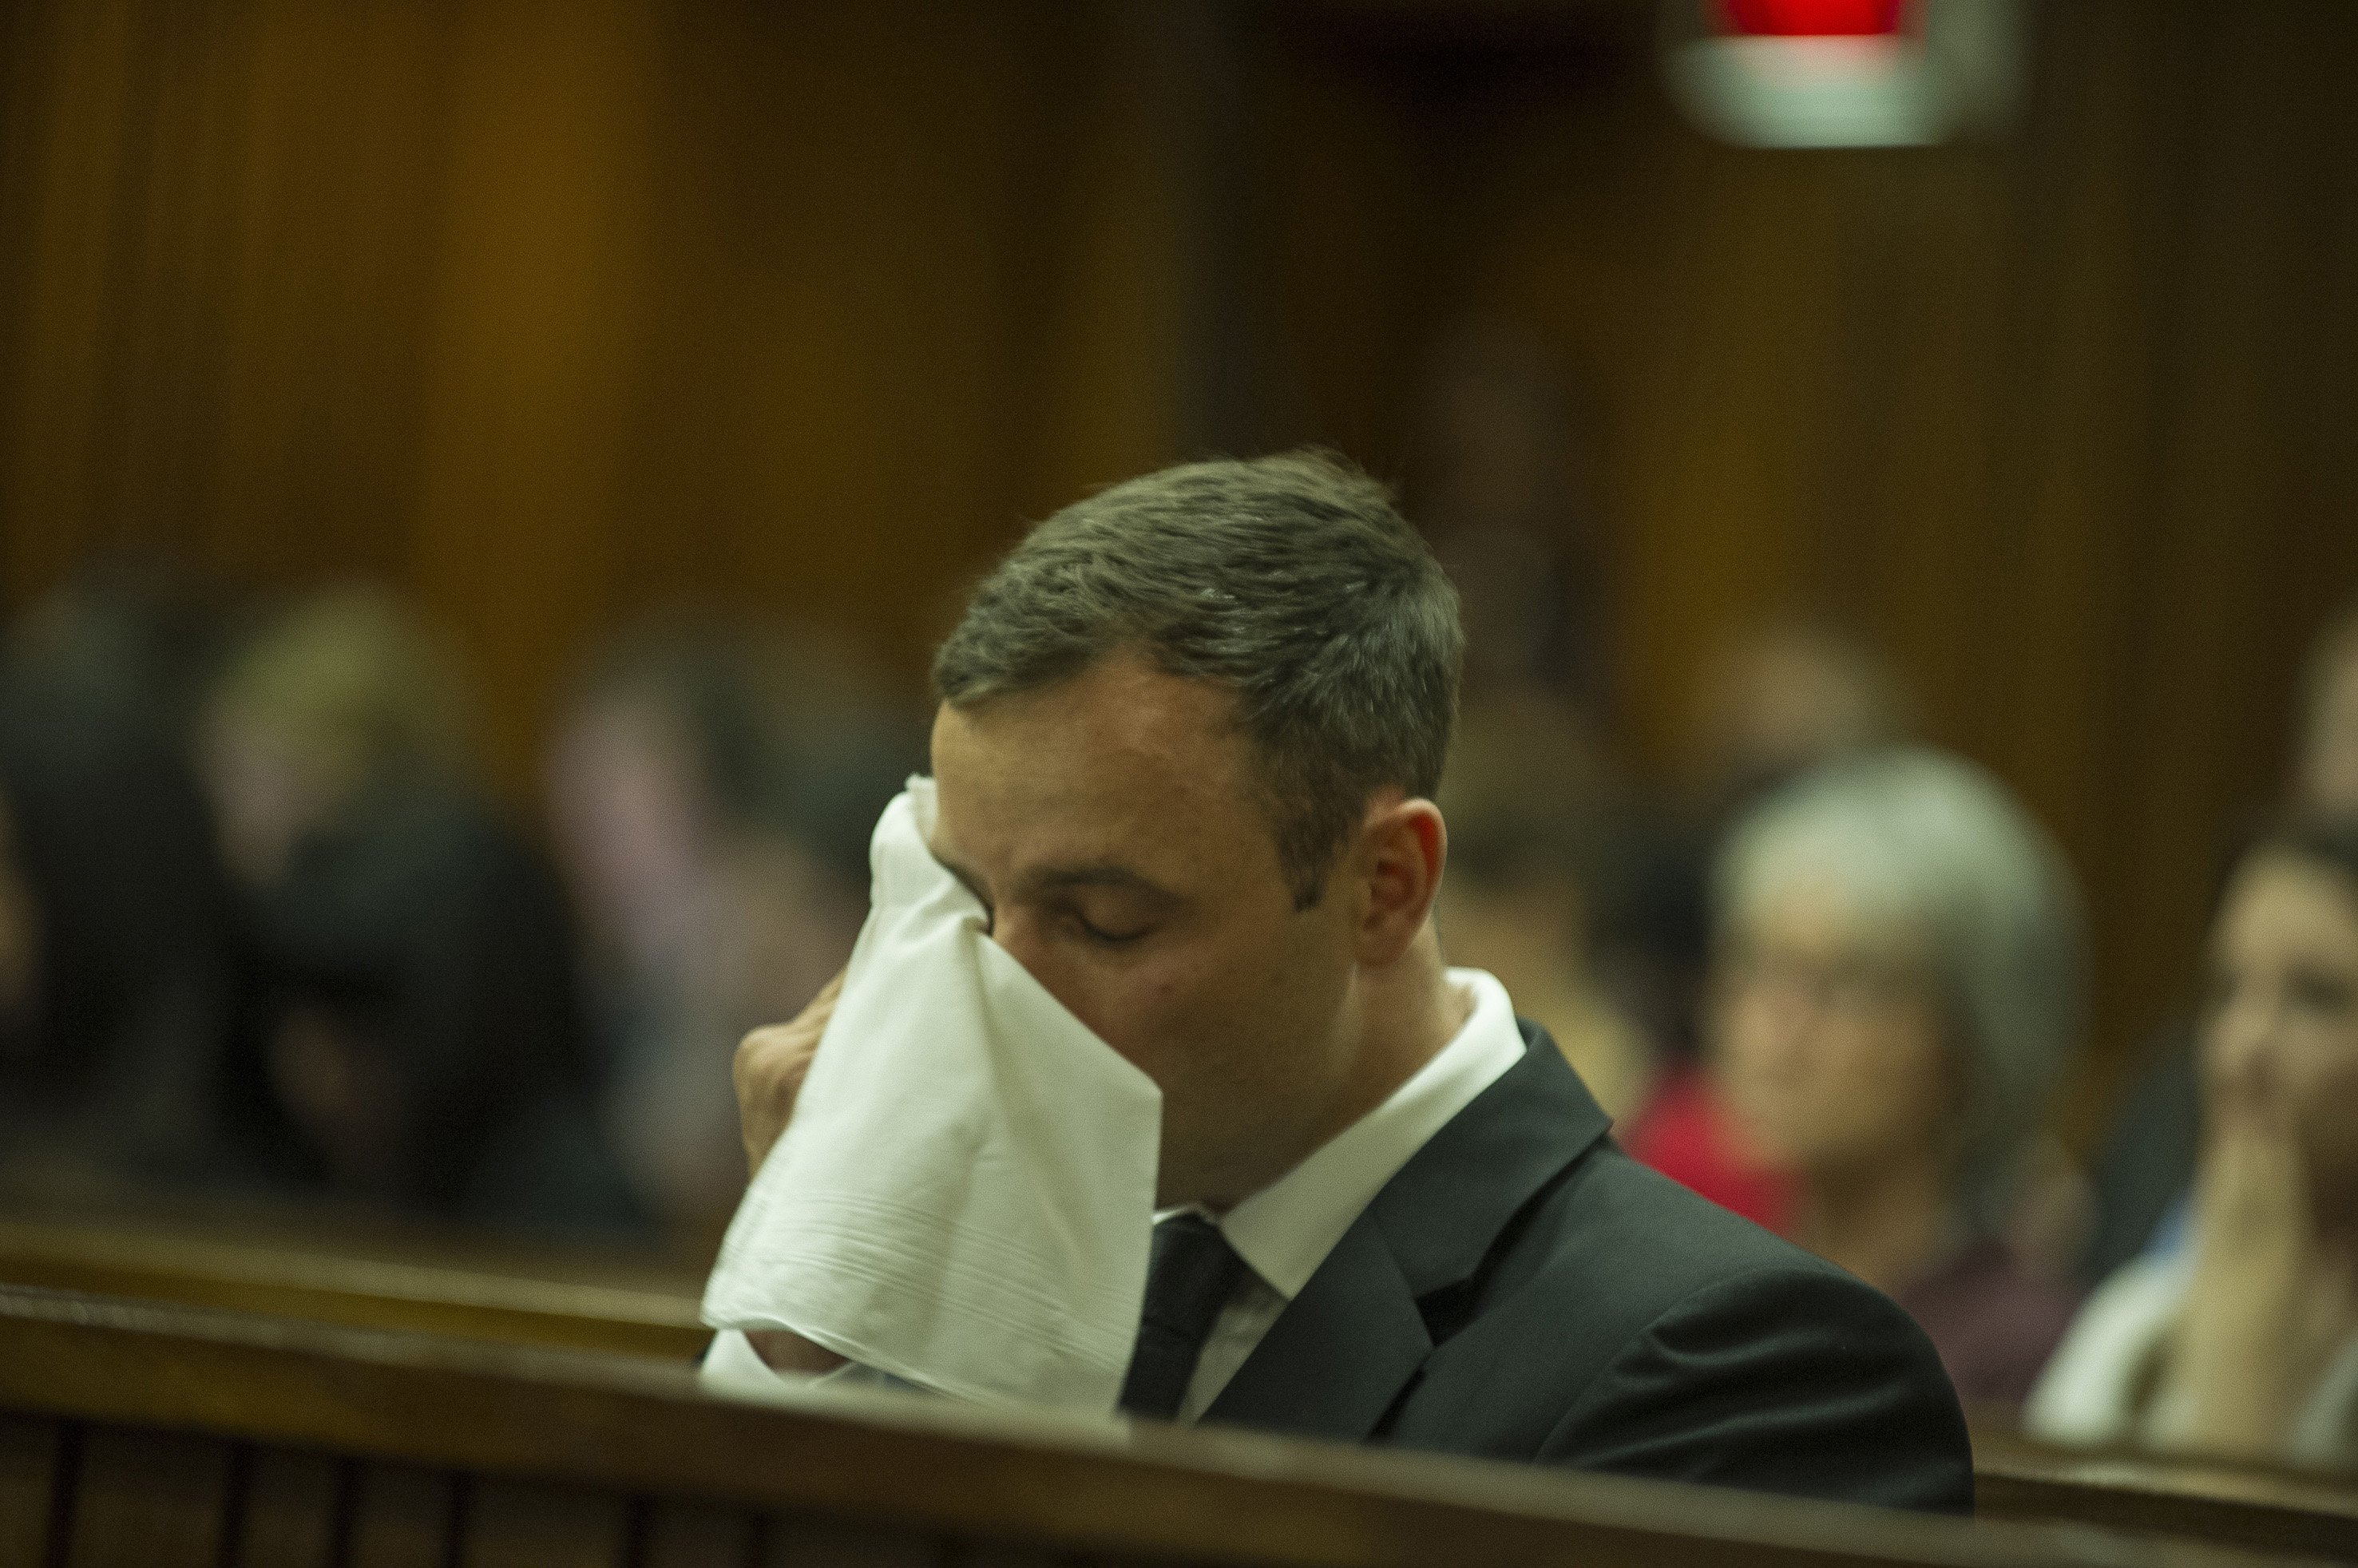 Paralympian Oscar Pistorius is seen crying during final arguments in sentencing at the high court in Pretoria, Friday, October 17, 2014.